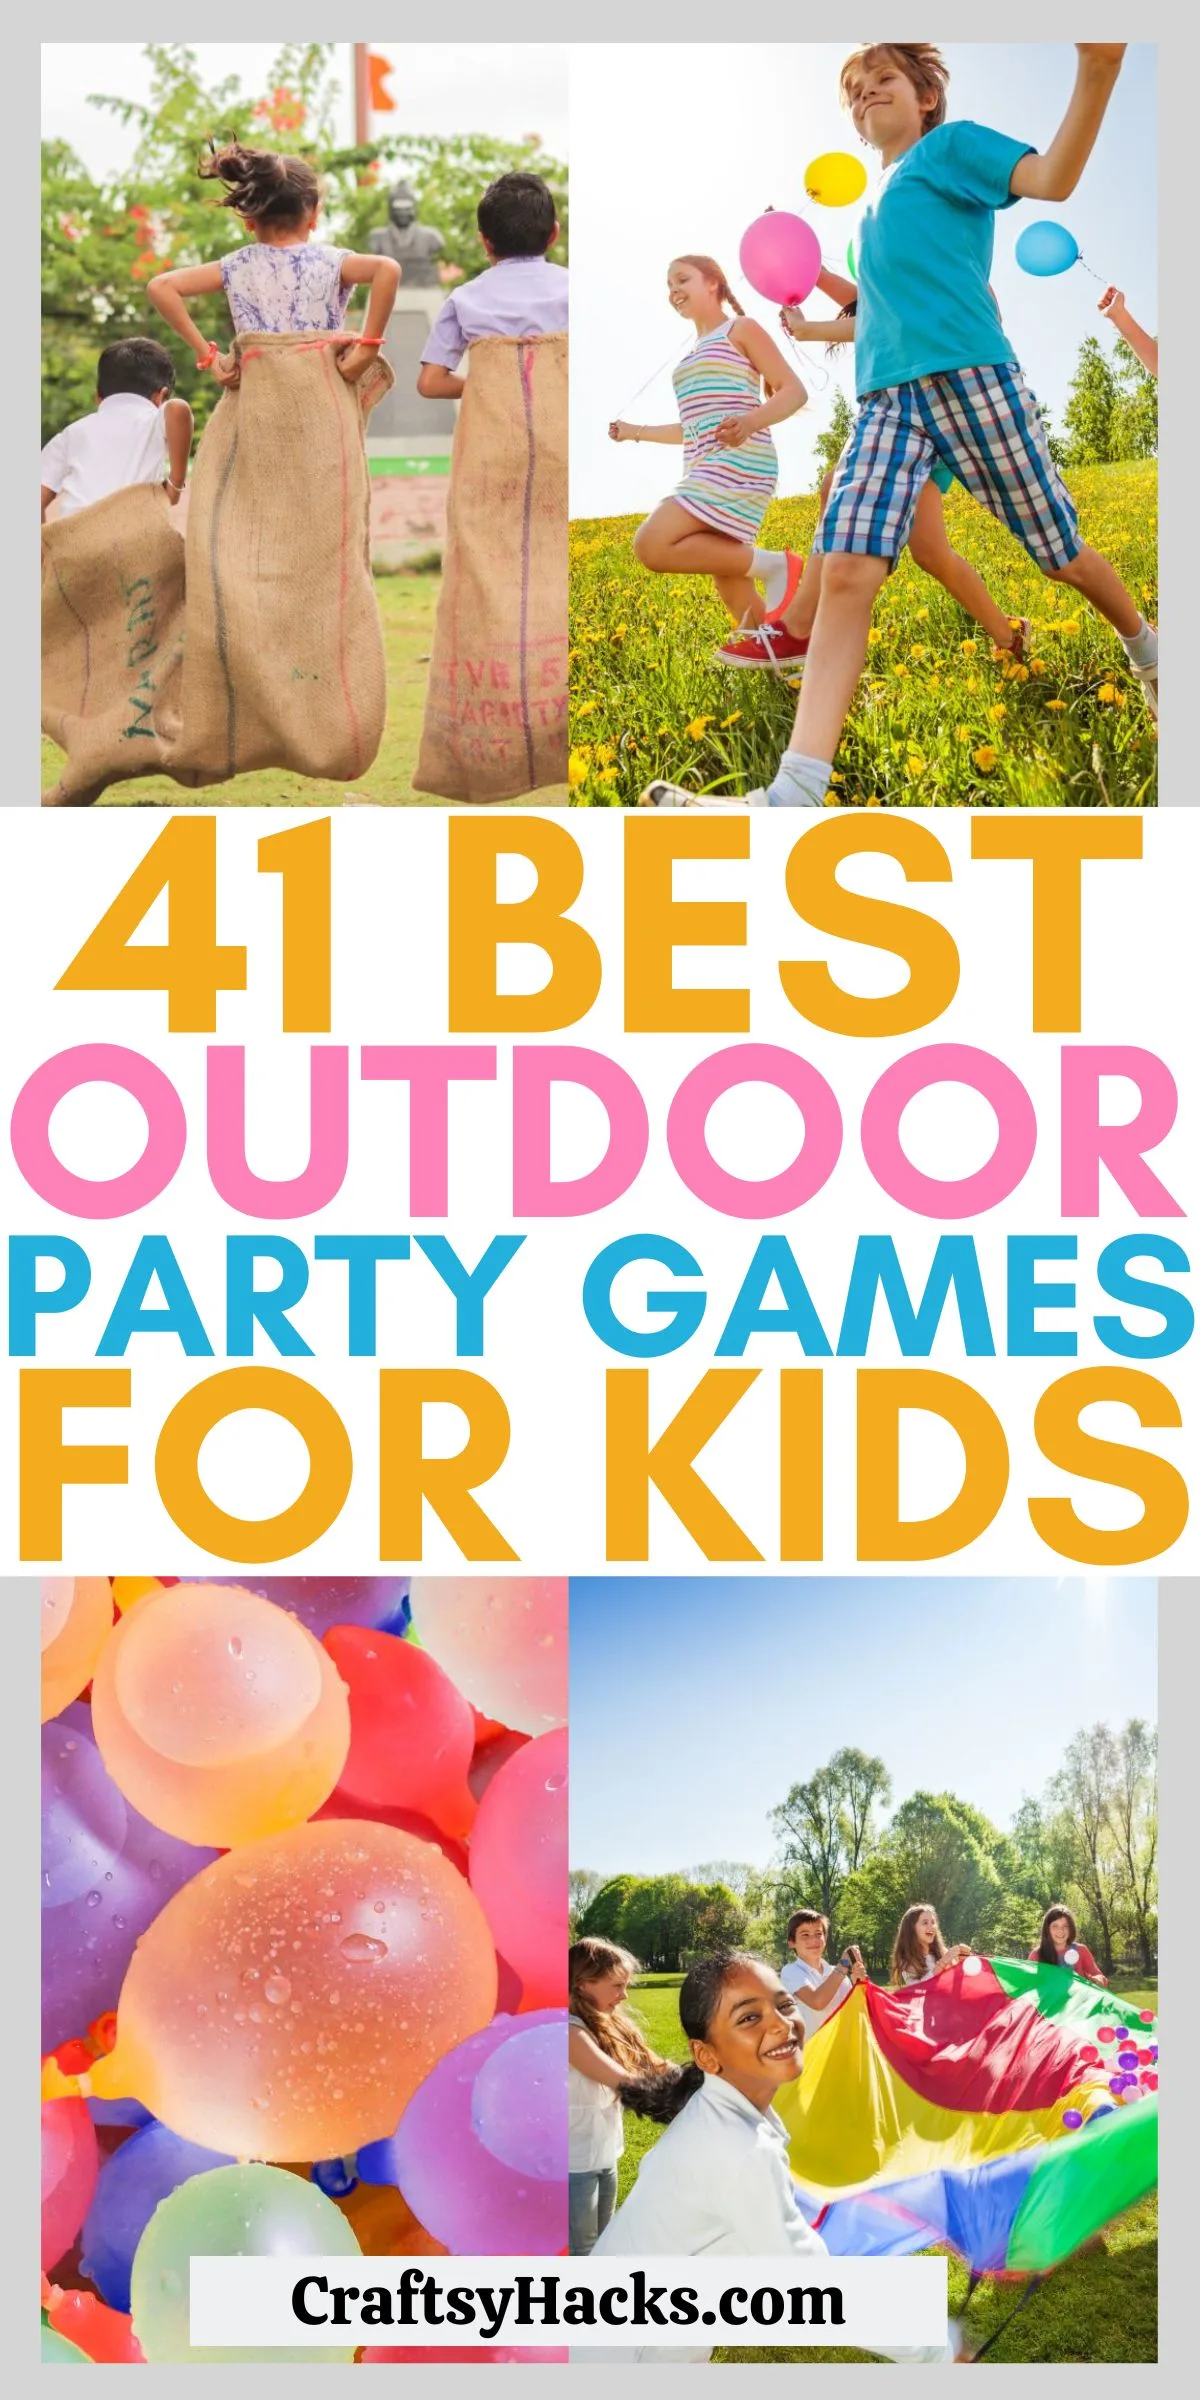 Party Activities For Kids.